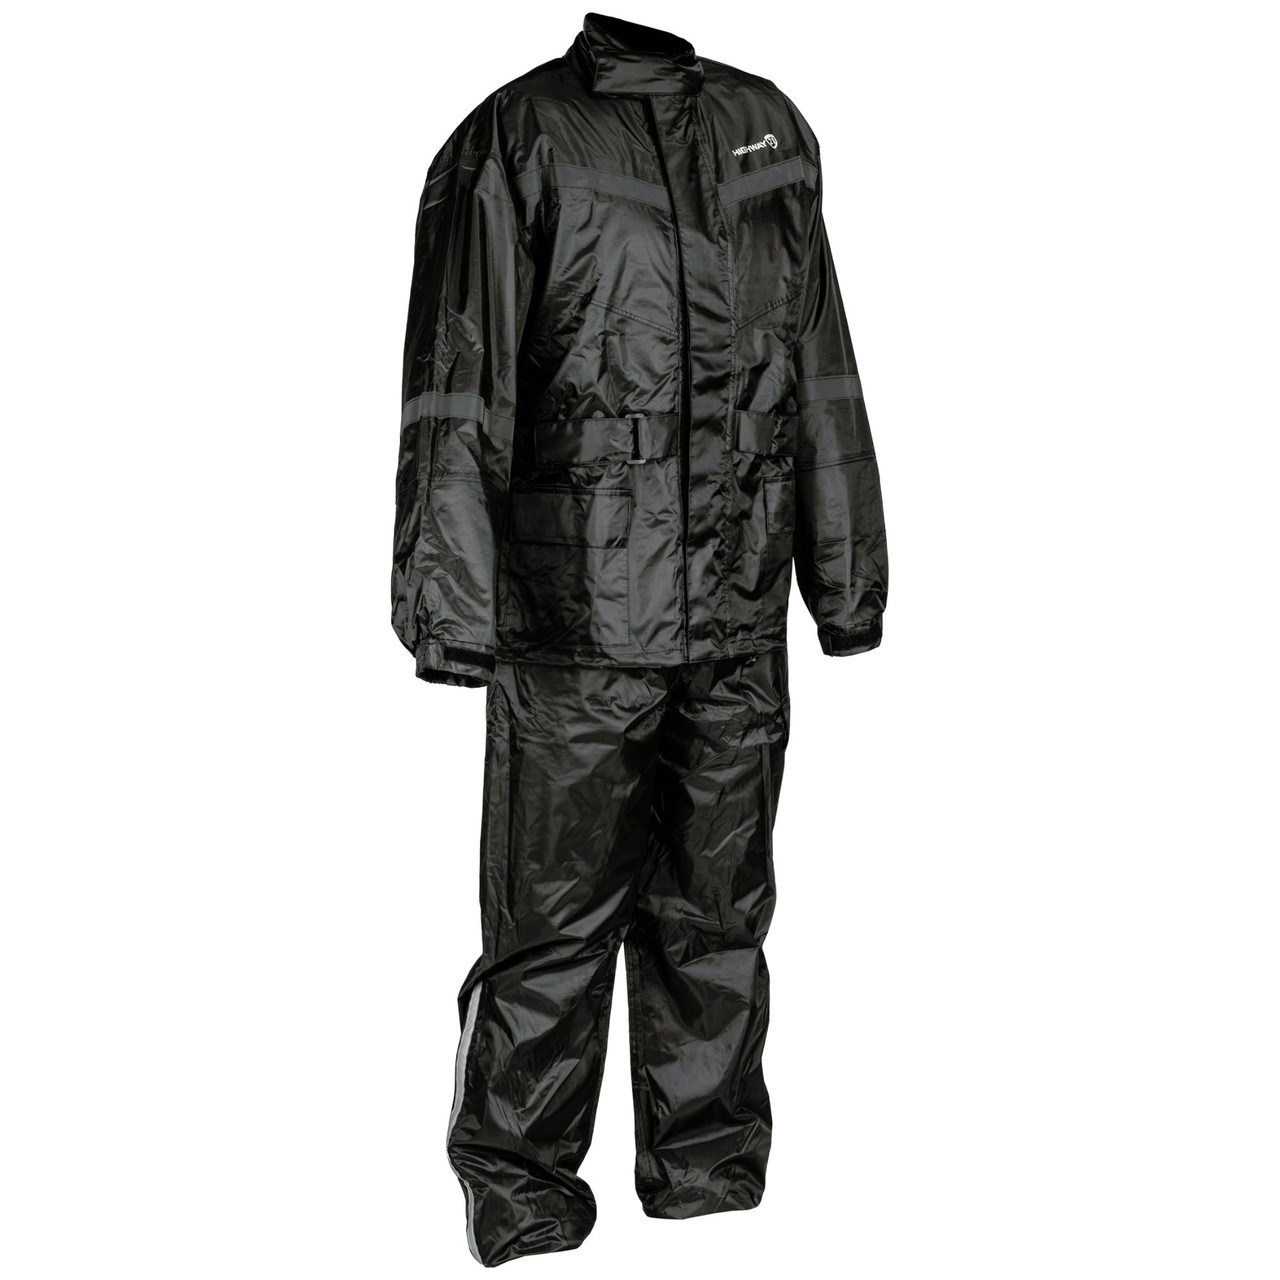 Pioneer Waterproof PVC Work Suit for Men – Repel Rain Gear Yellow Safety  Jacket and Bib Pants - 3 PC Set With Detectable Hood